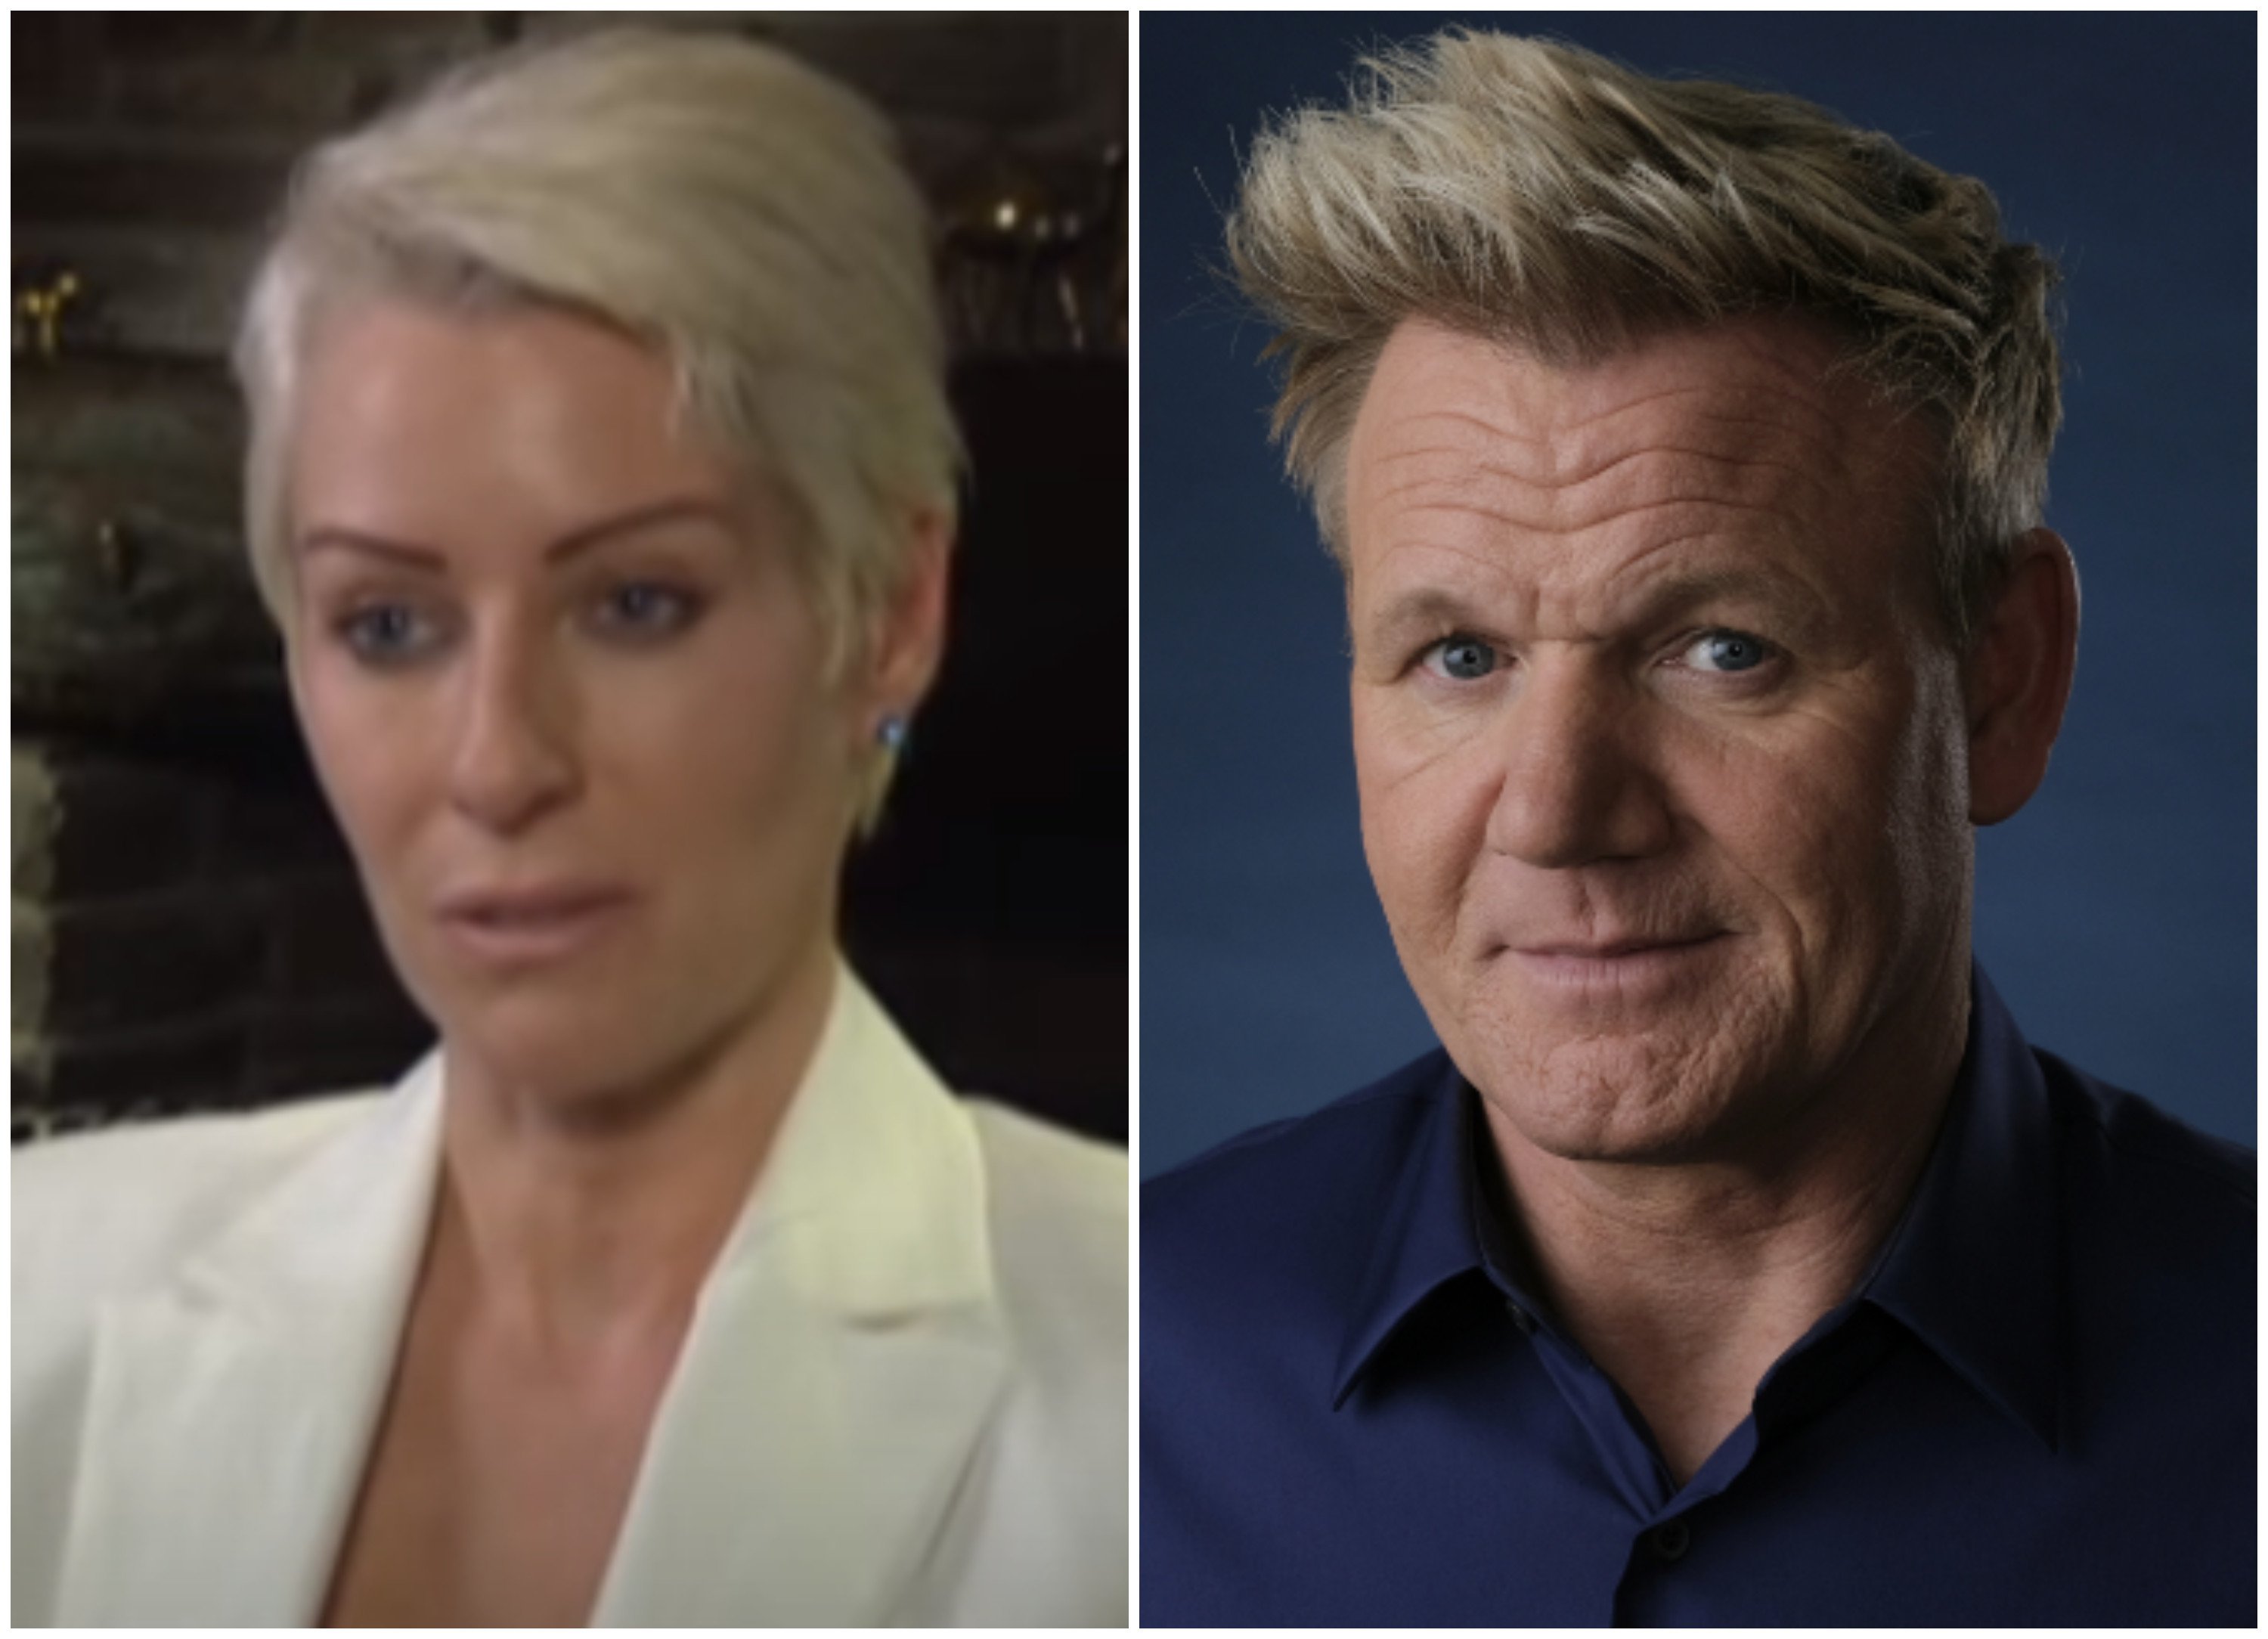 Sarah Symonds continues to claim she had an affair with celebrity TV chef Gordon Ramsay, and he continues to deny it. Photos: Biography/YouTube, AP